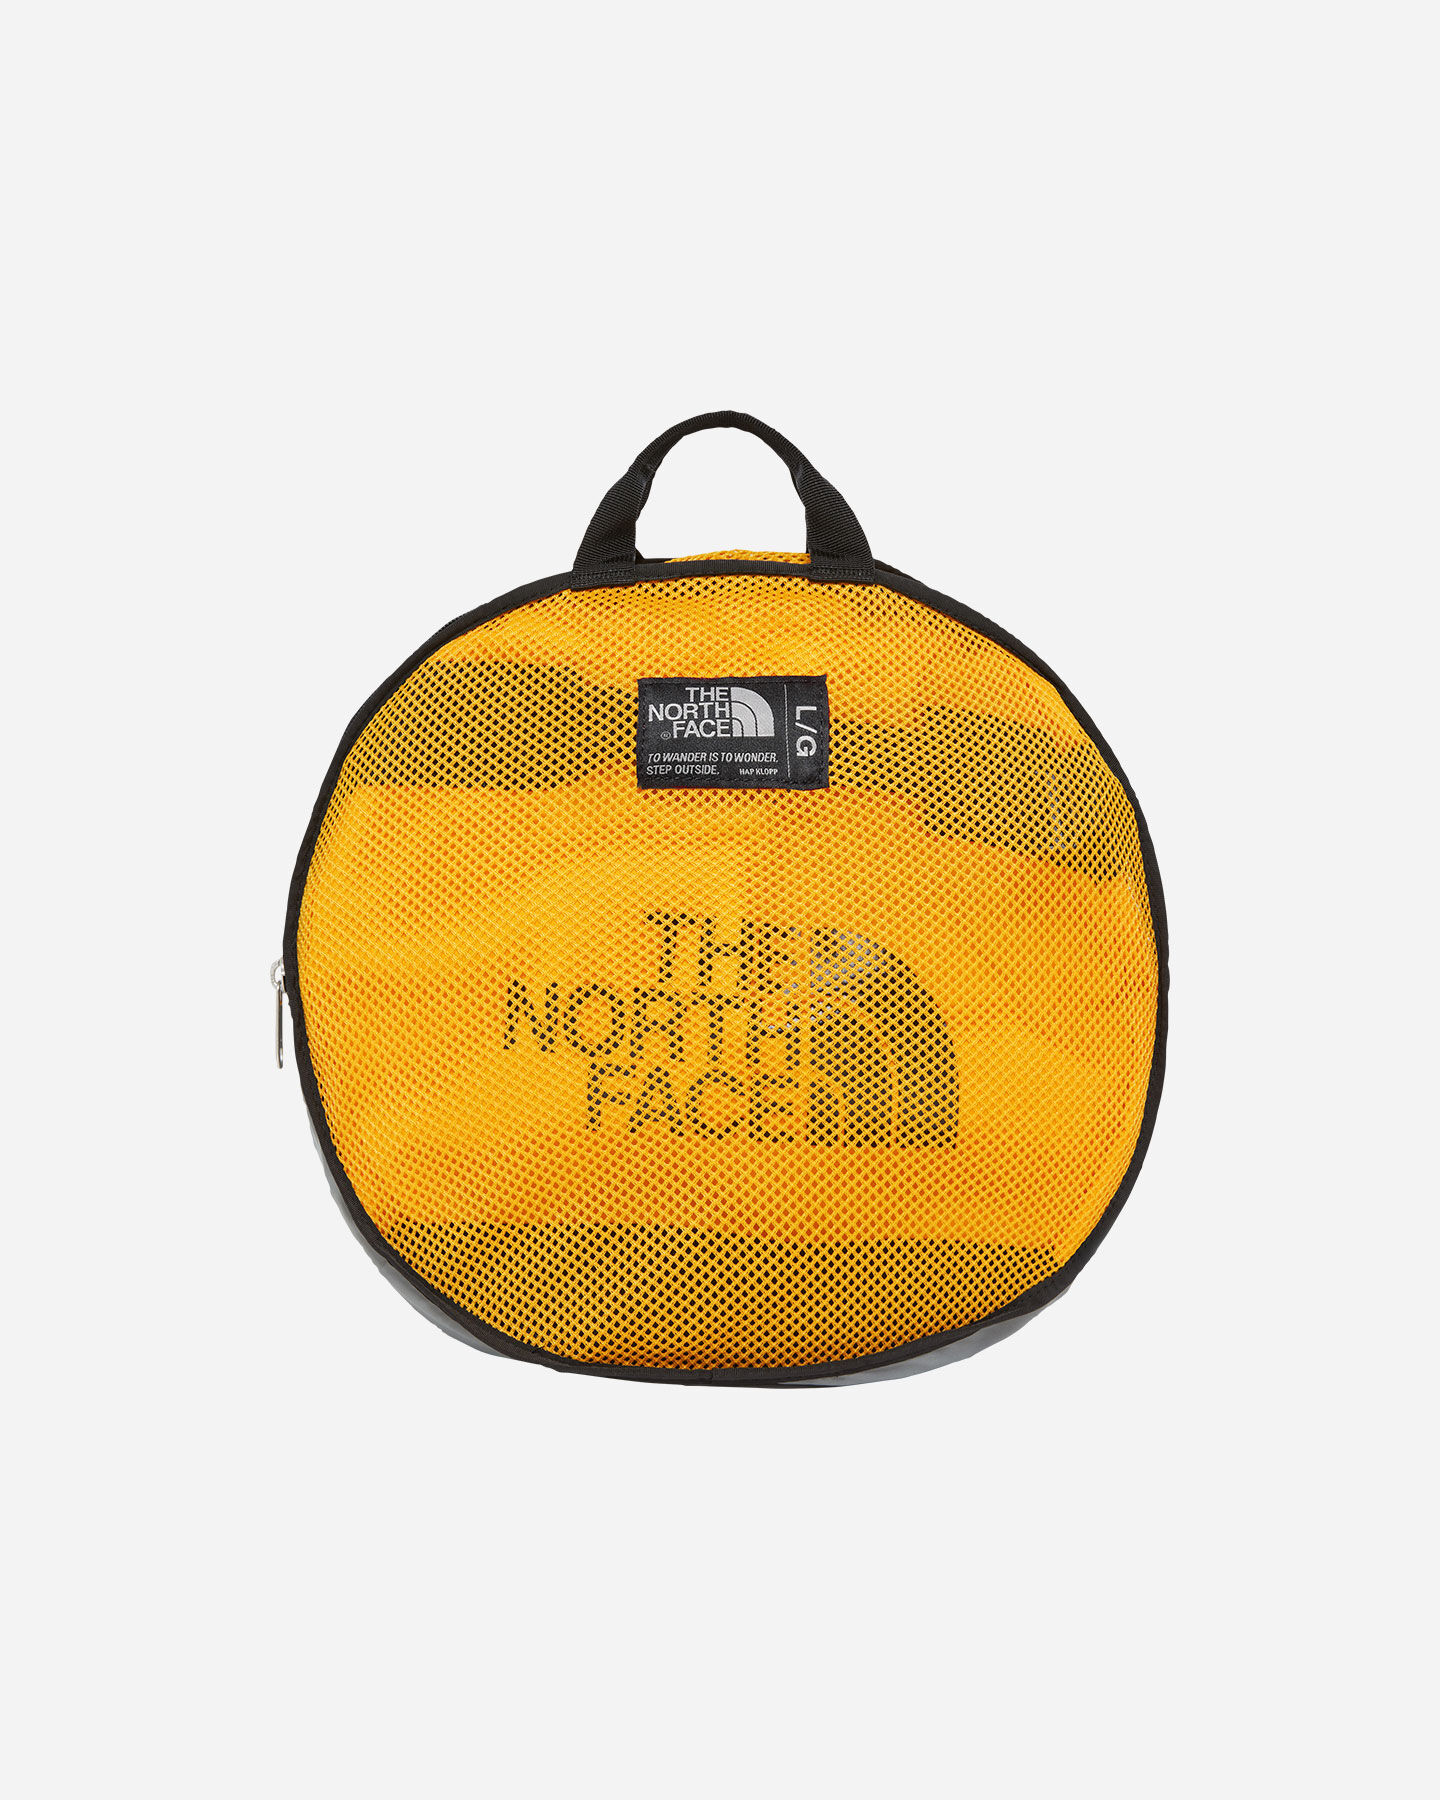  Borsa THE NORTH FACE BASE CAMP DUFFEL LARGE SUMMIT S5347750|ZU3|OS scatto 3